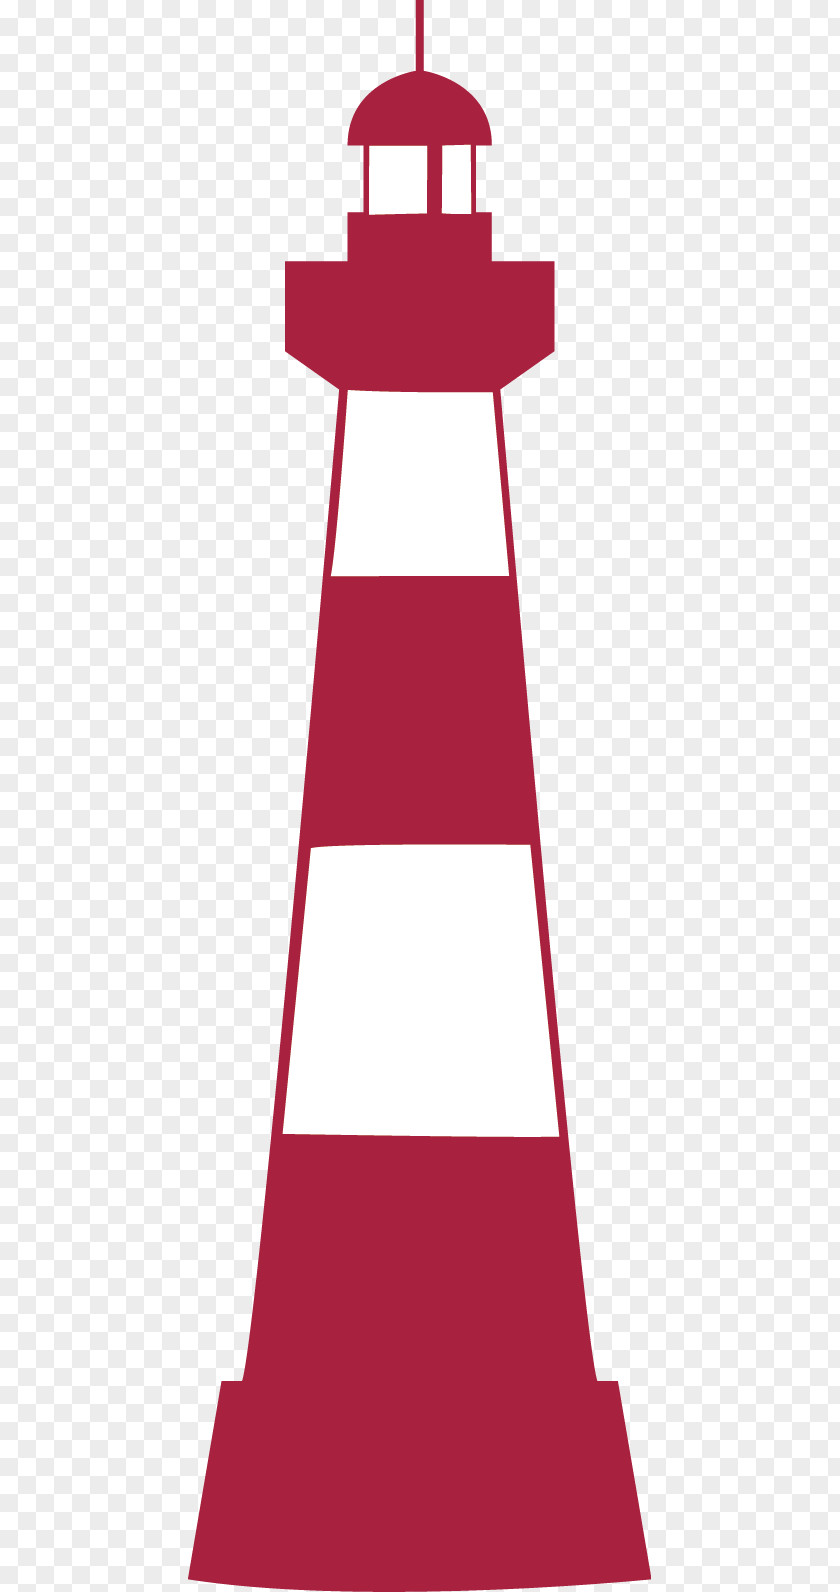 Lighthouse Silhouette Material Clip Art PNG